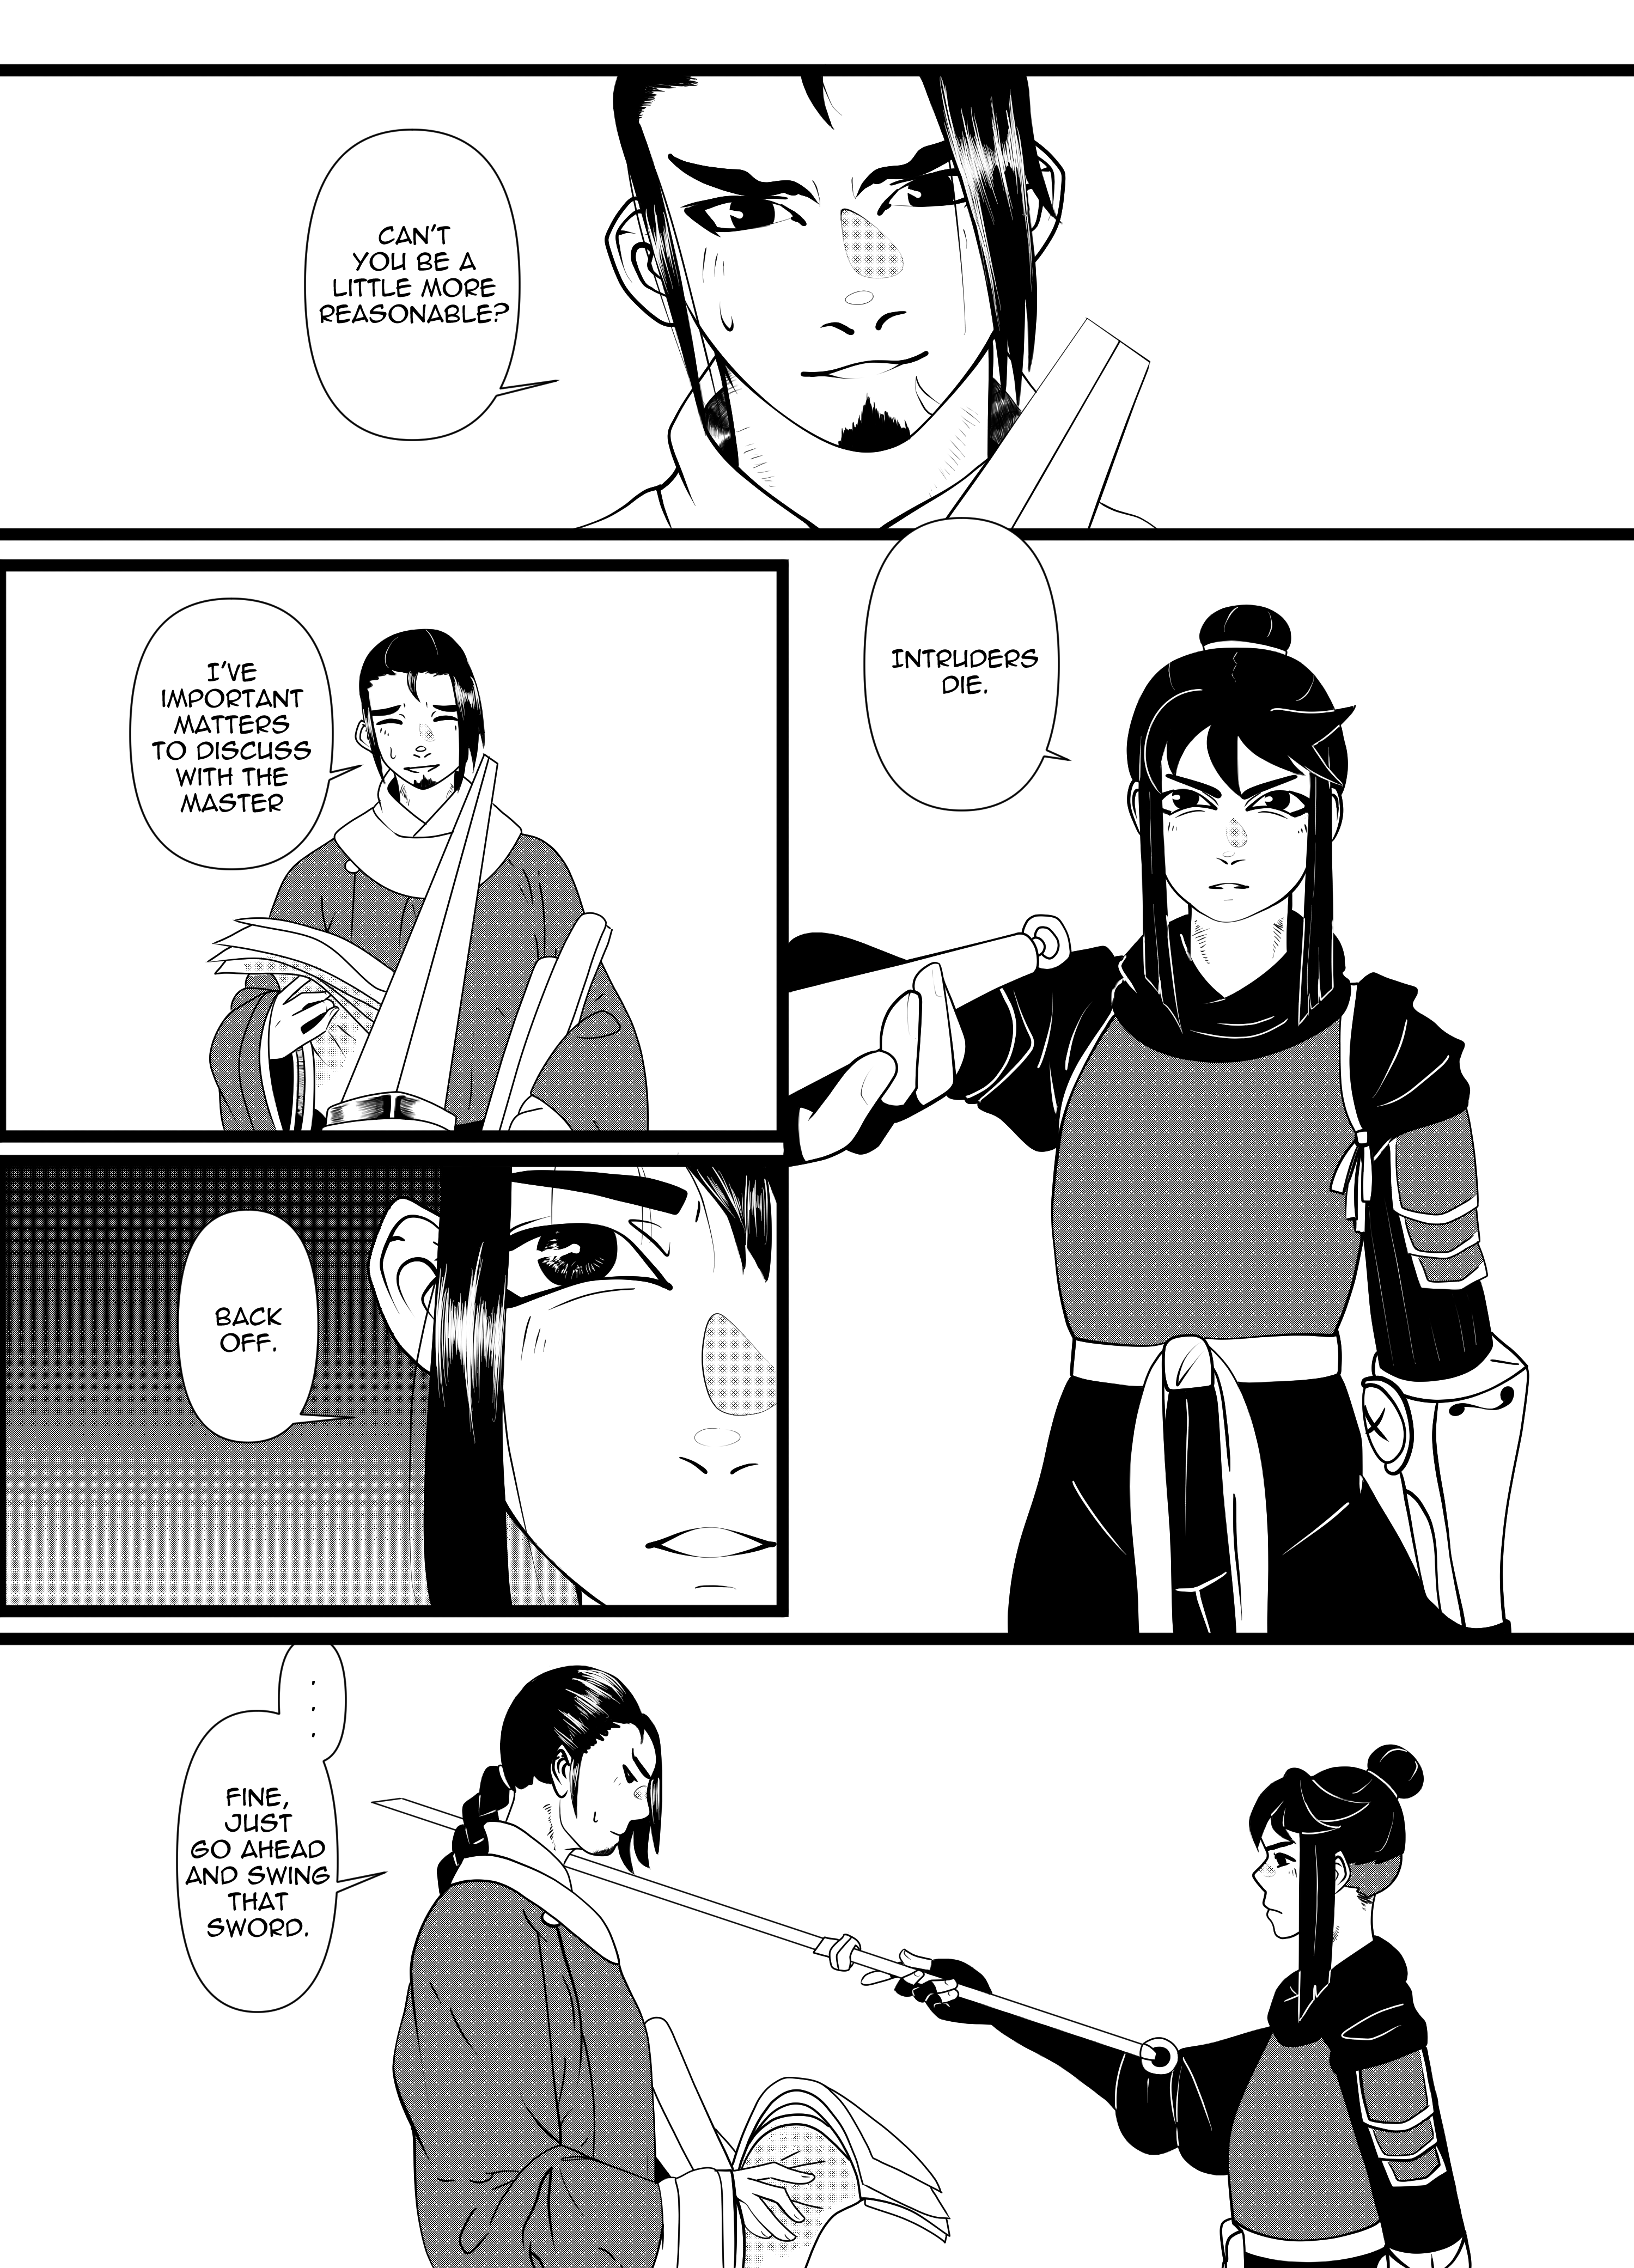 A redraw of a page from Chengge Xing featuring my OC Mao and Lan Fan from Fullmetal Alchemist.